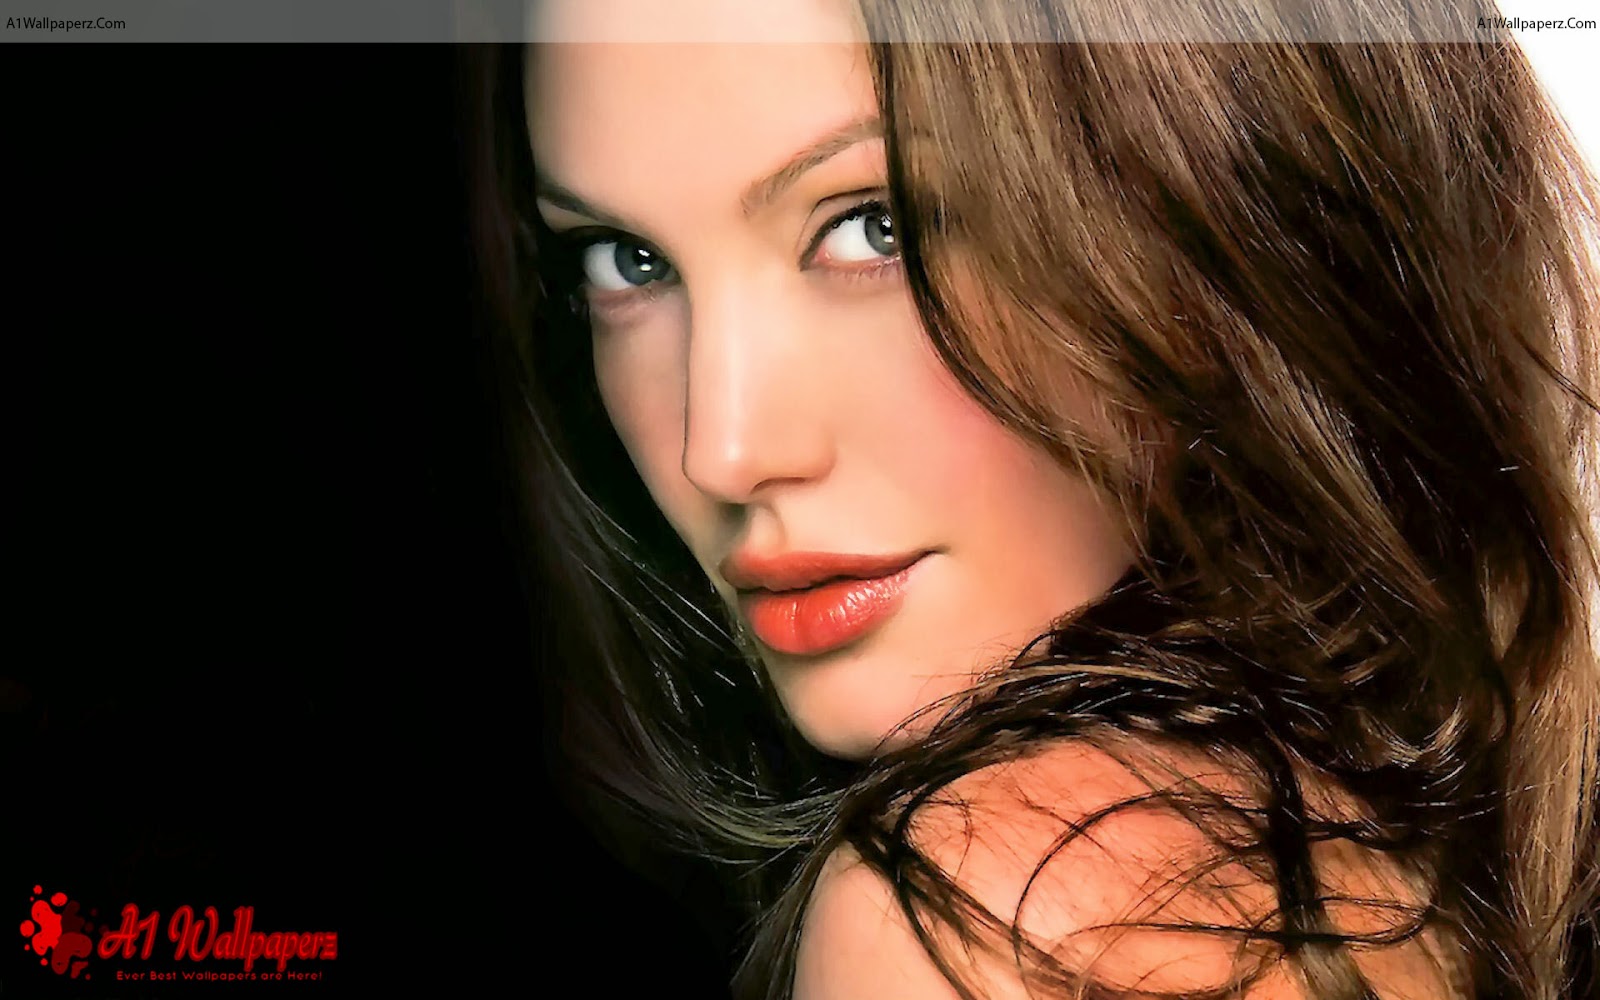 Angelina Jolie Hot And Sexy Wallpapers Hd Images Pictures For Mobiles And Desktop A1